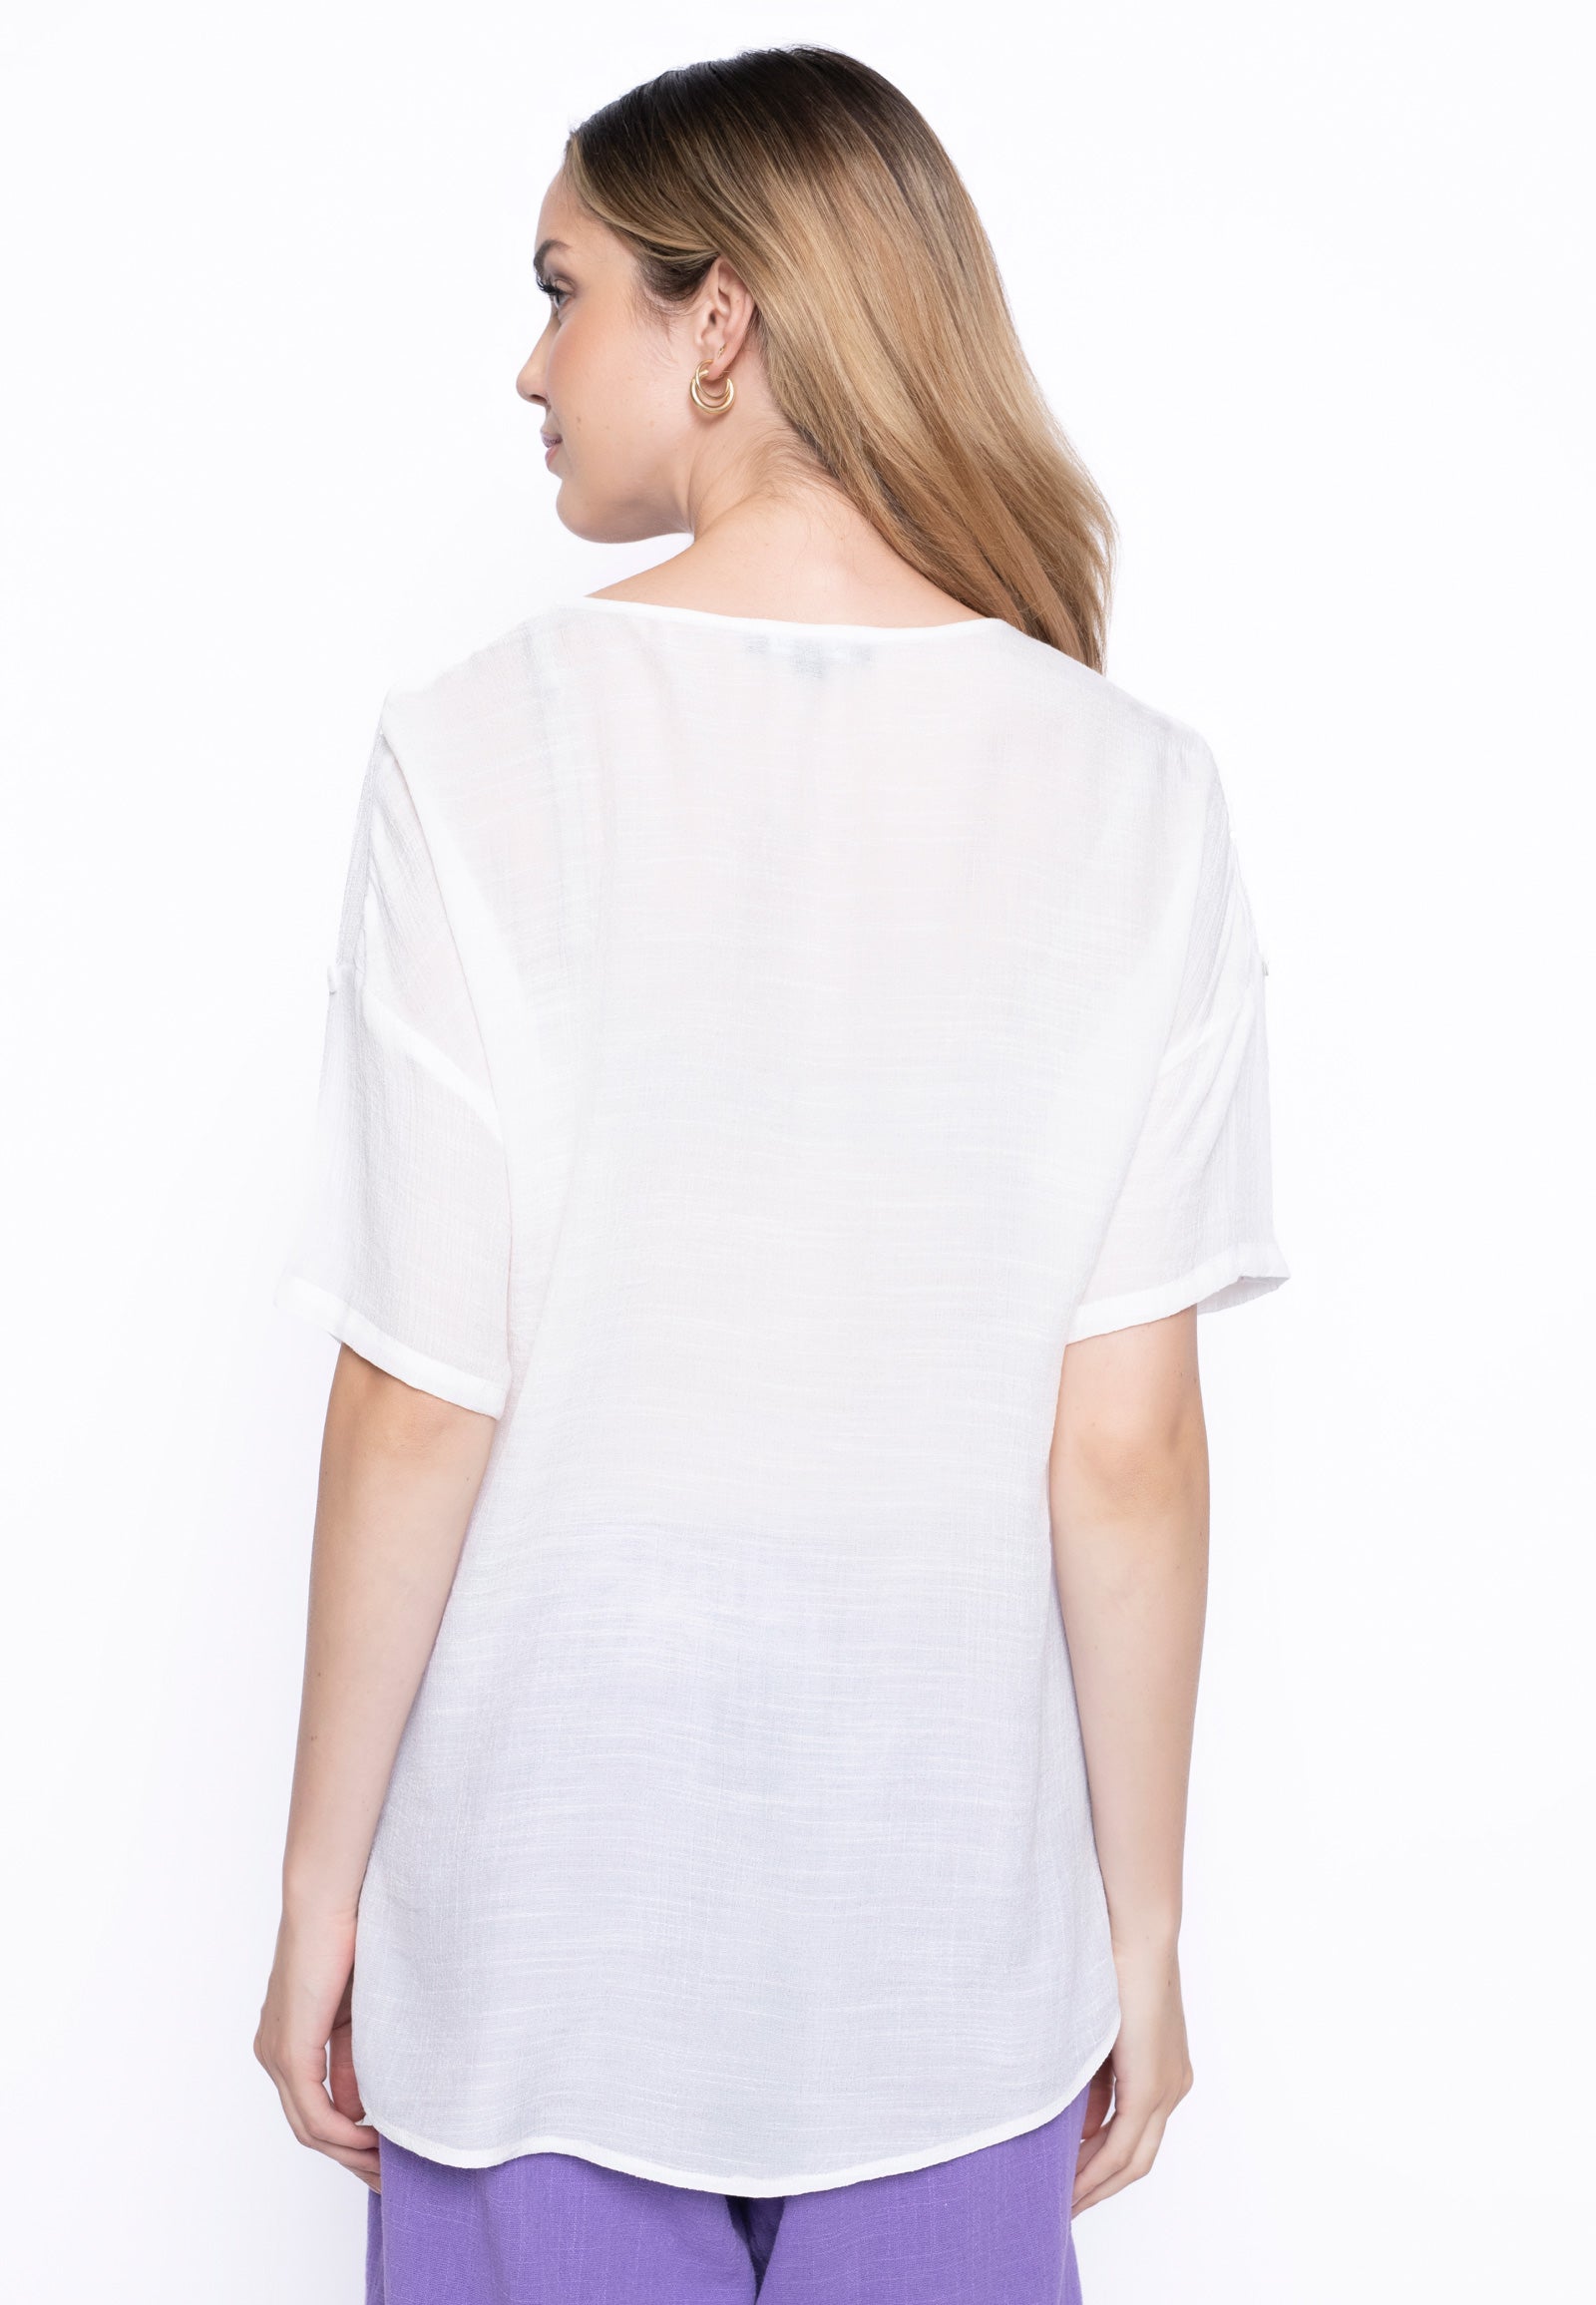 The Embroidered Flowy Blouse from the back.